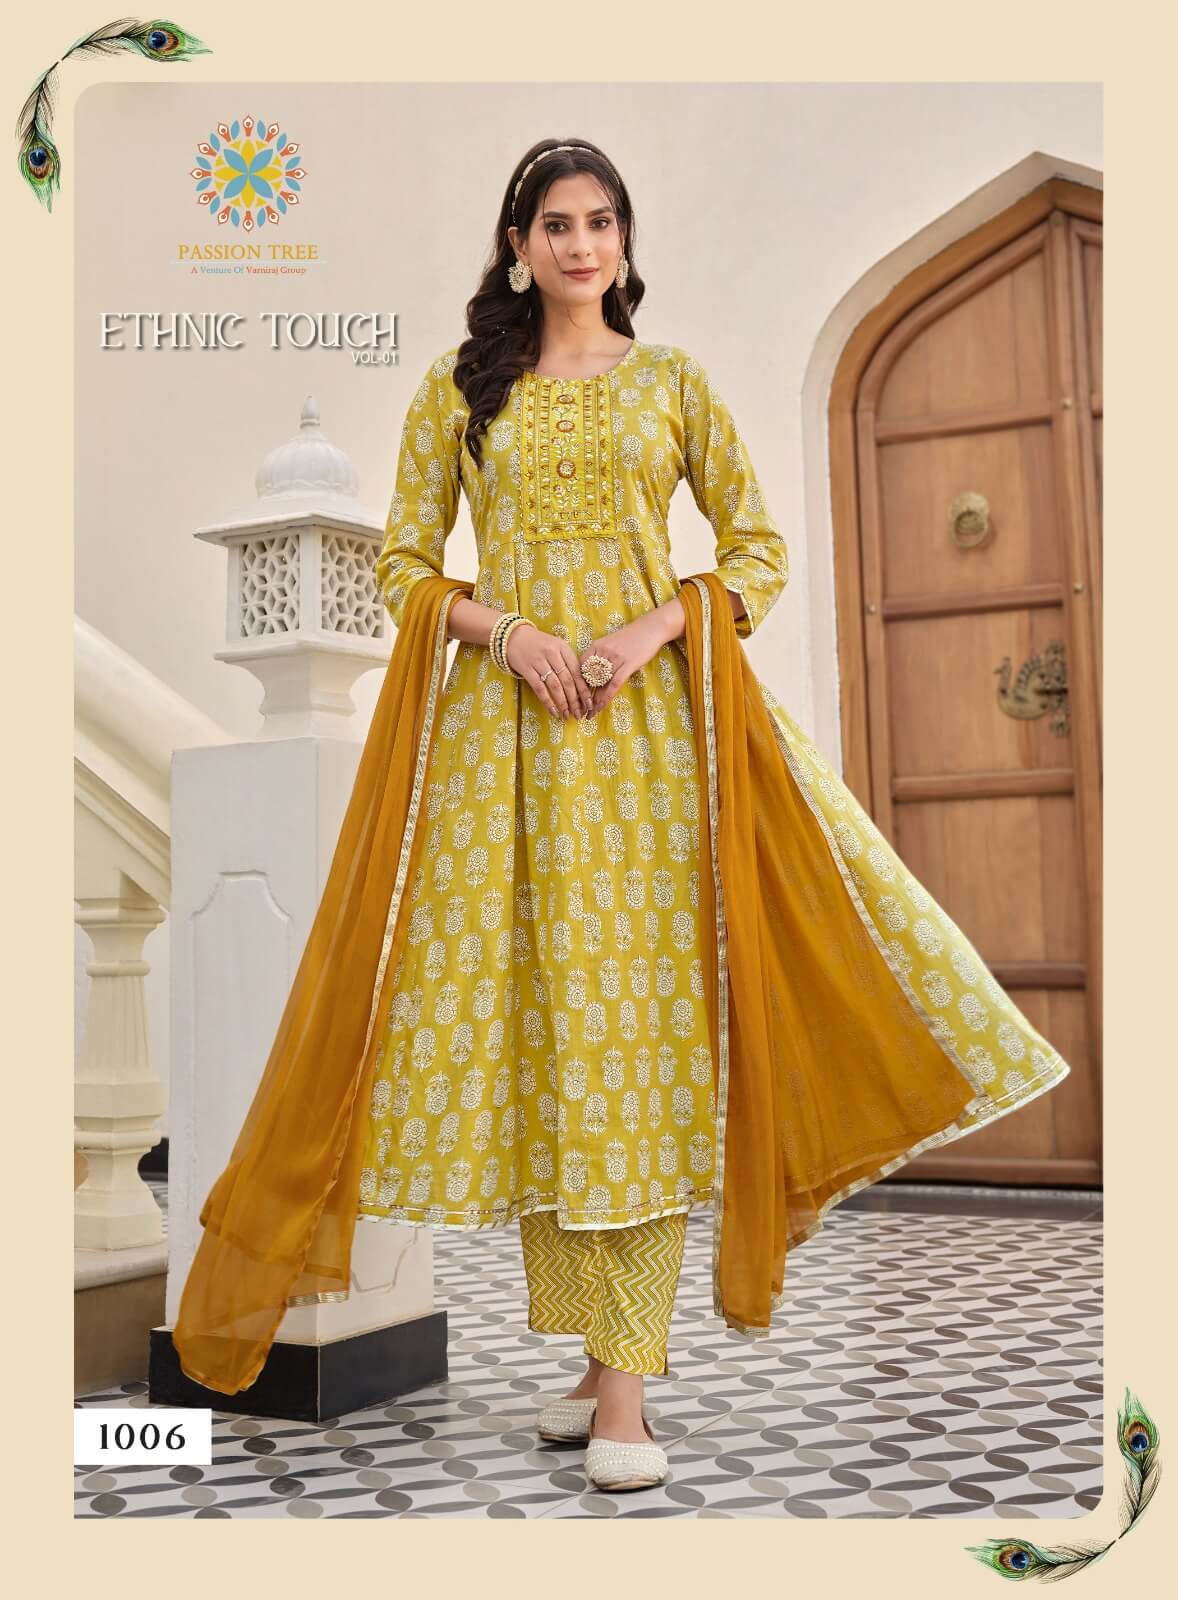 Passion Tree Ethnic Touch Vol 1 Anarkali Suits Catalog collection 7